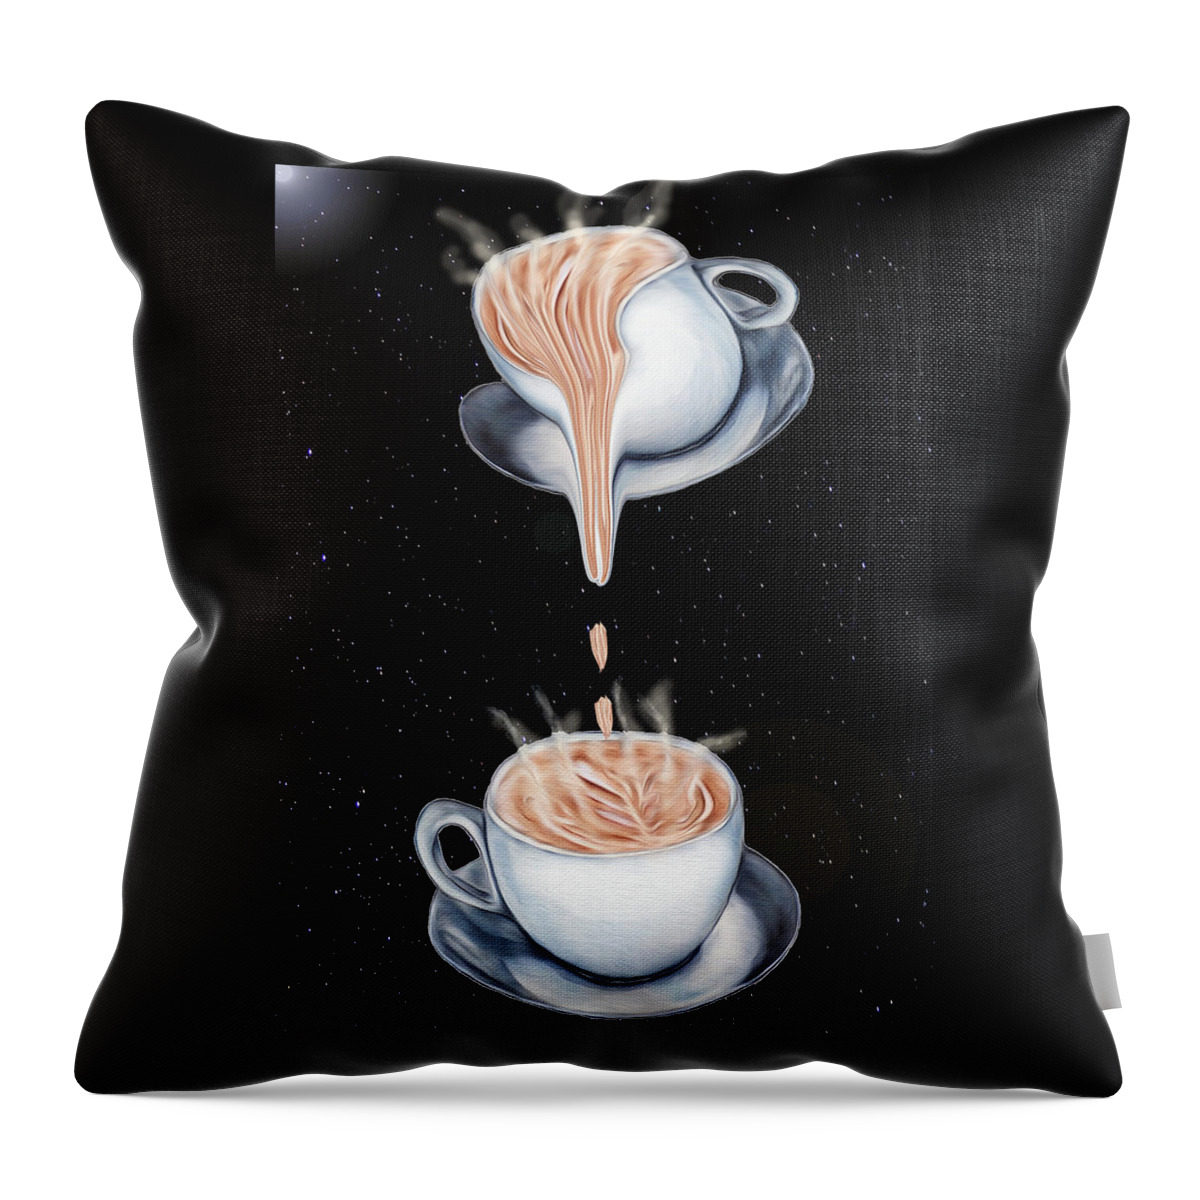 Digital Throw Pillow featuring the digital art The Latte' Milky Way by Ronald Mills